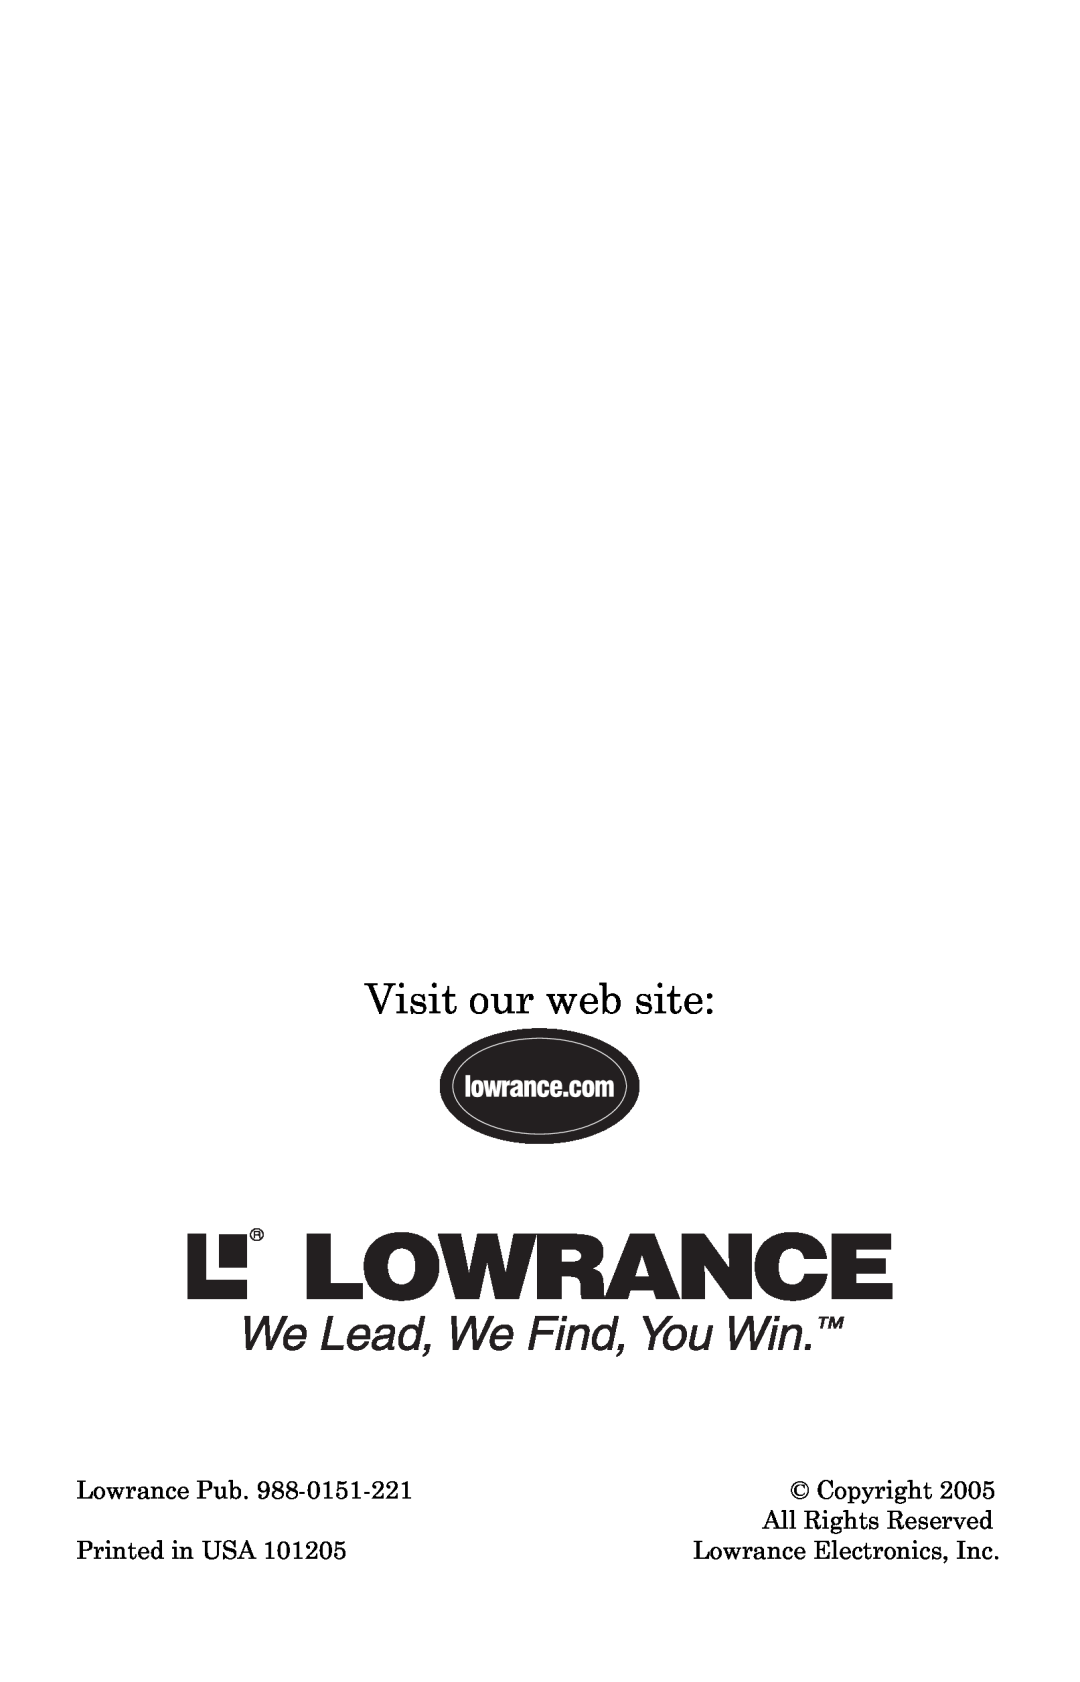 Lowrance electronic LMF-400 manual Visit our web site, Lowrance Pub, Copyright, All Rights Reserved, Printed in USA 